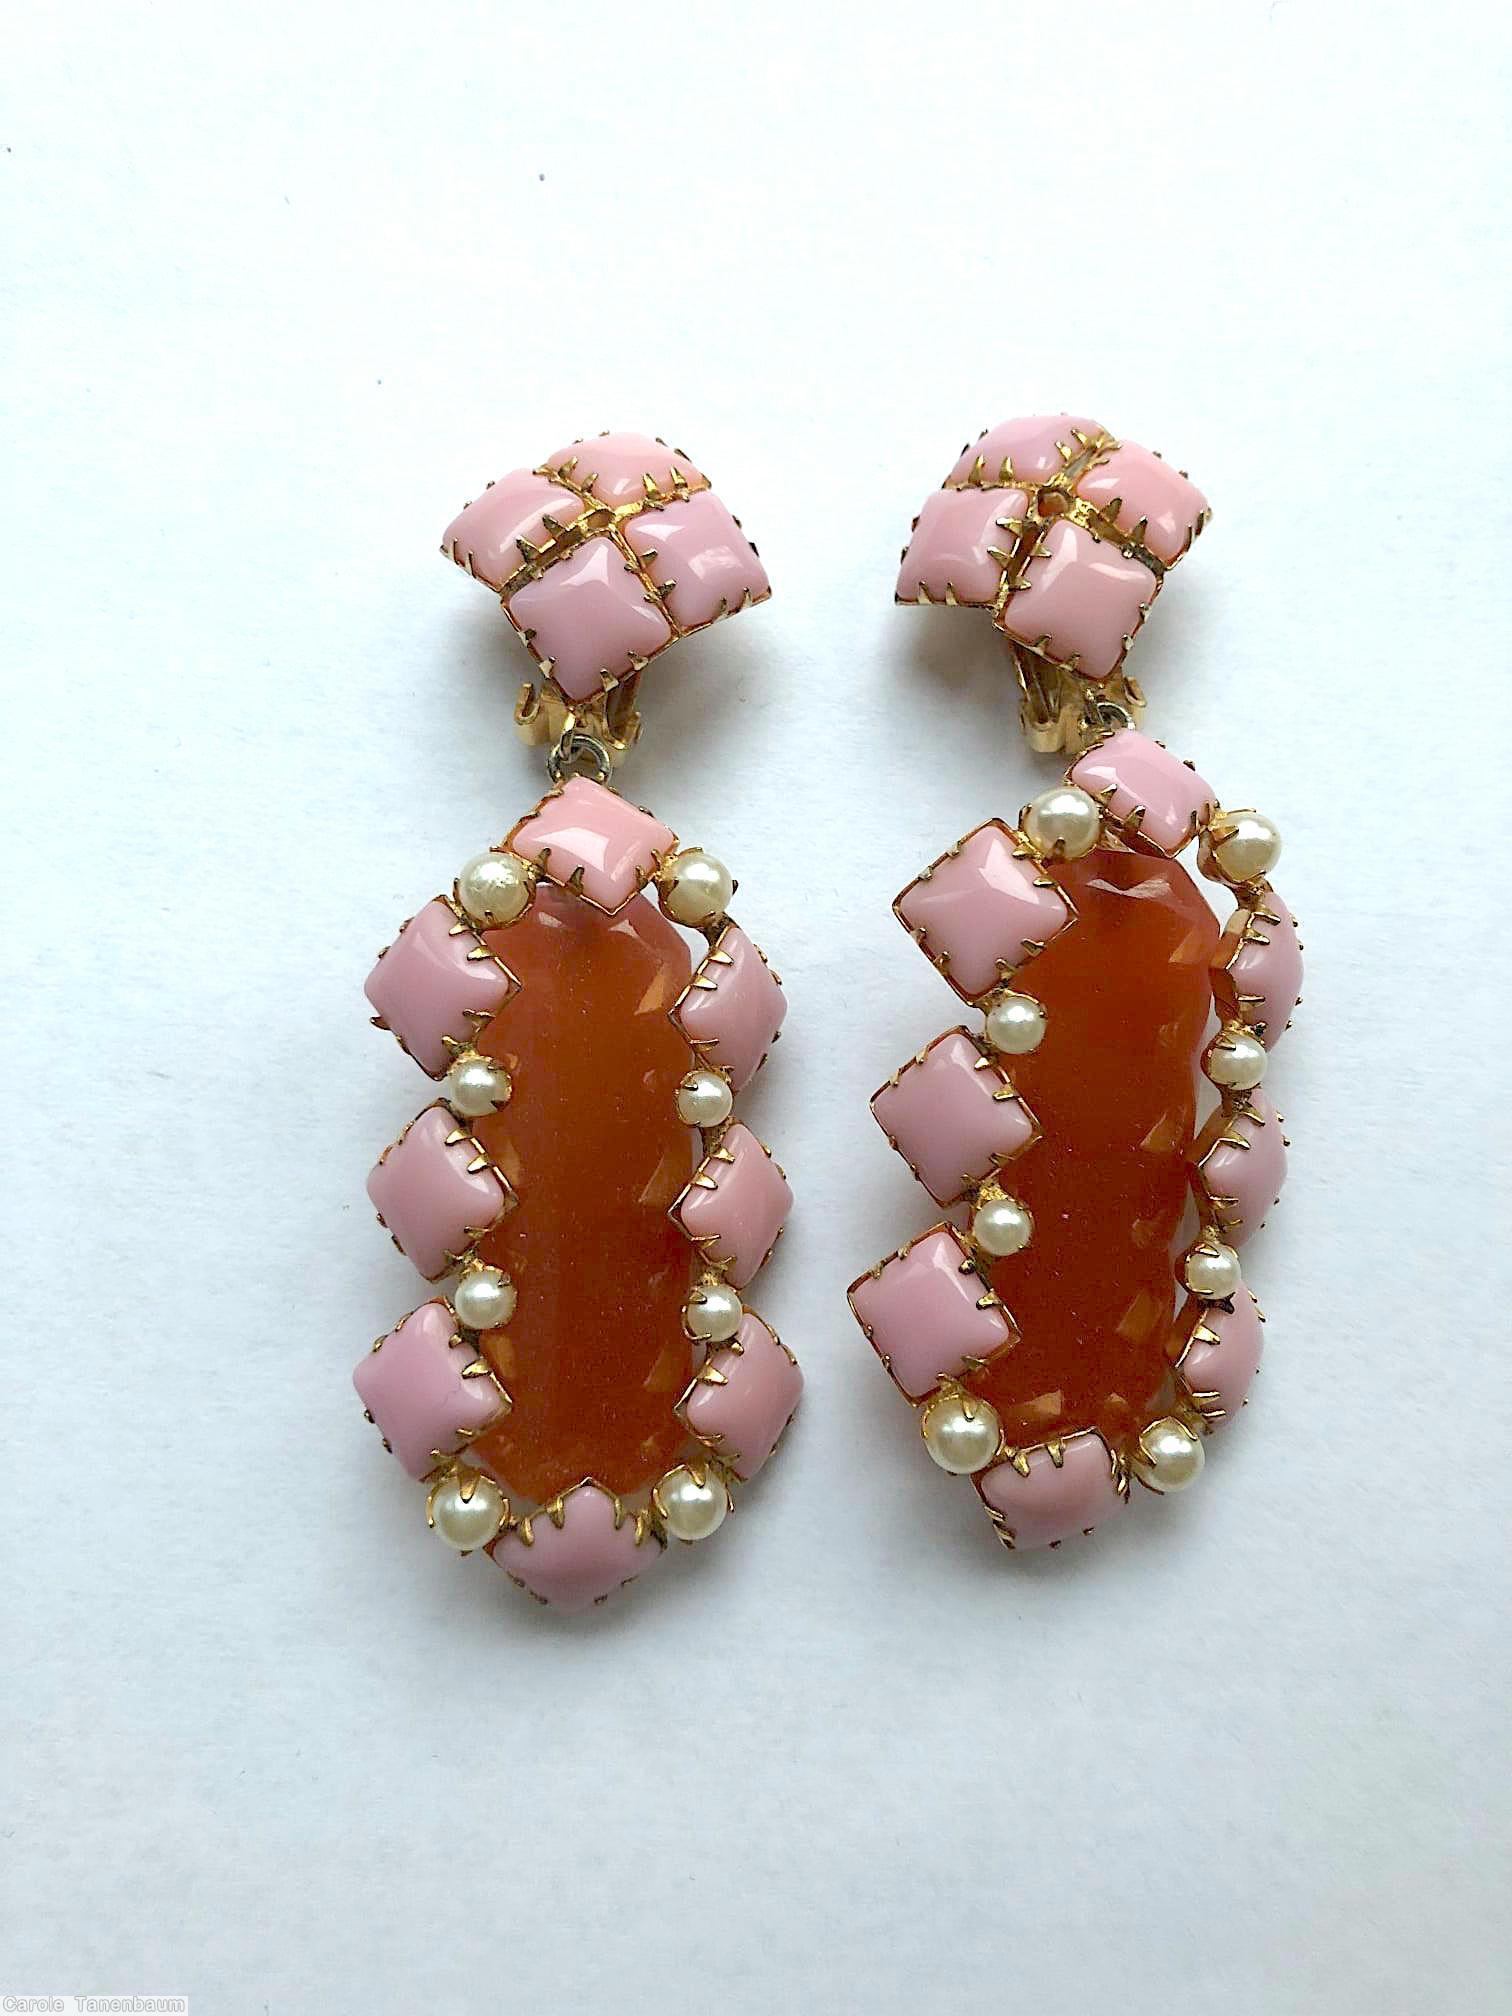 Schreiner top down earring bottom elongated hexagon stone surrounding 8 small square stone 8 faux pearl seeds top 4 small square stone opaque pink small square stone carnelian elongated hexagon goldtone jewelry